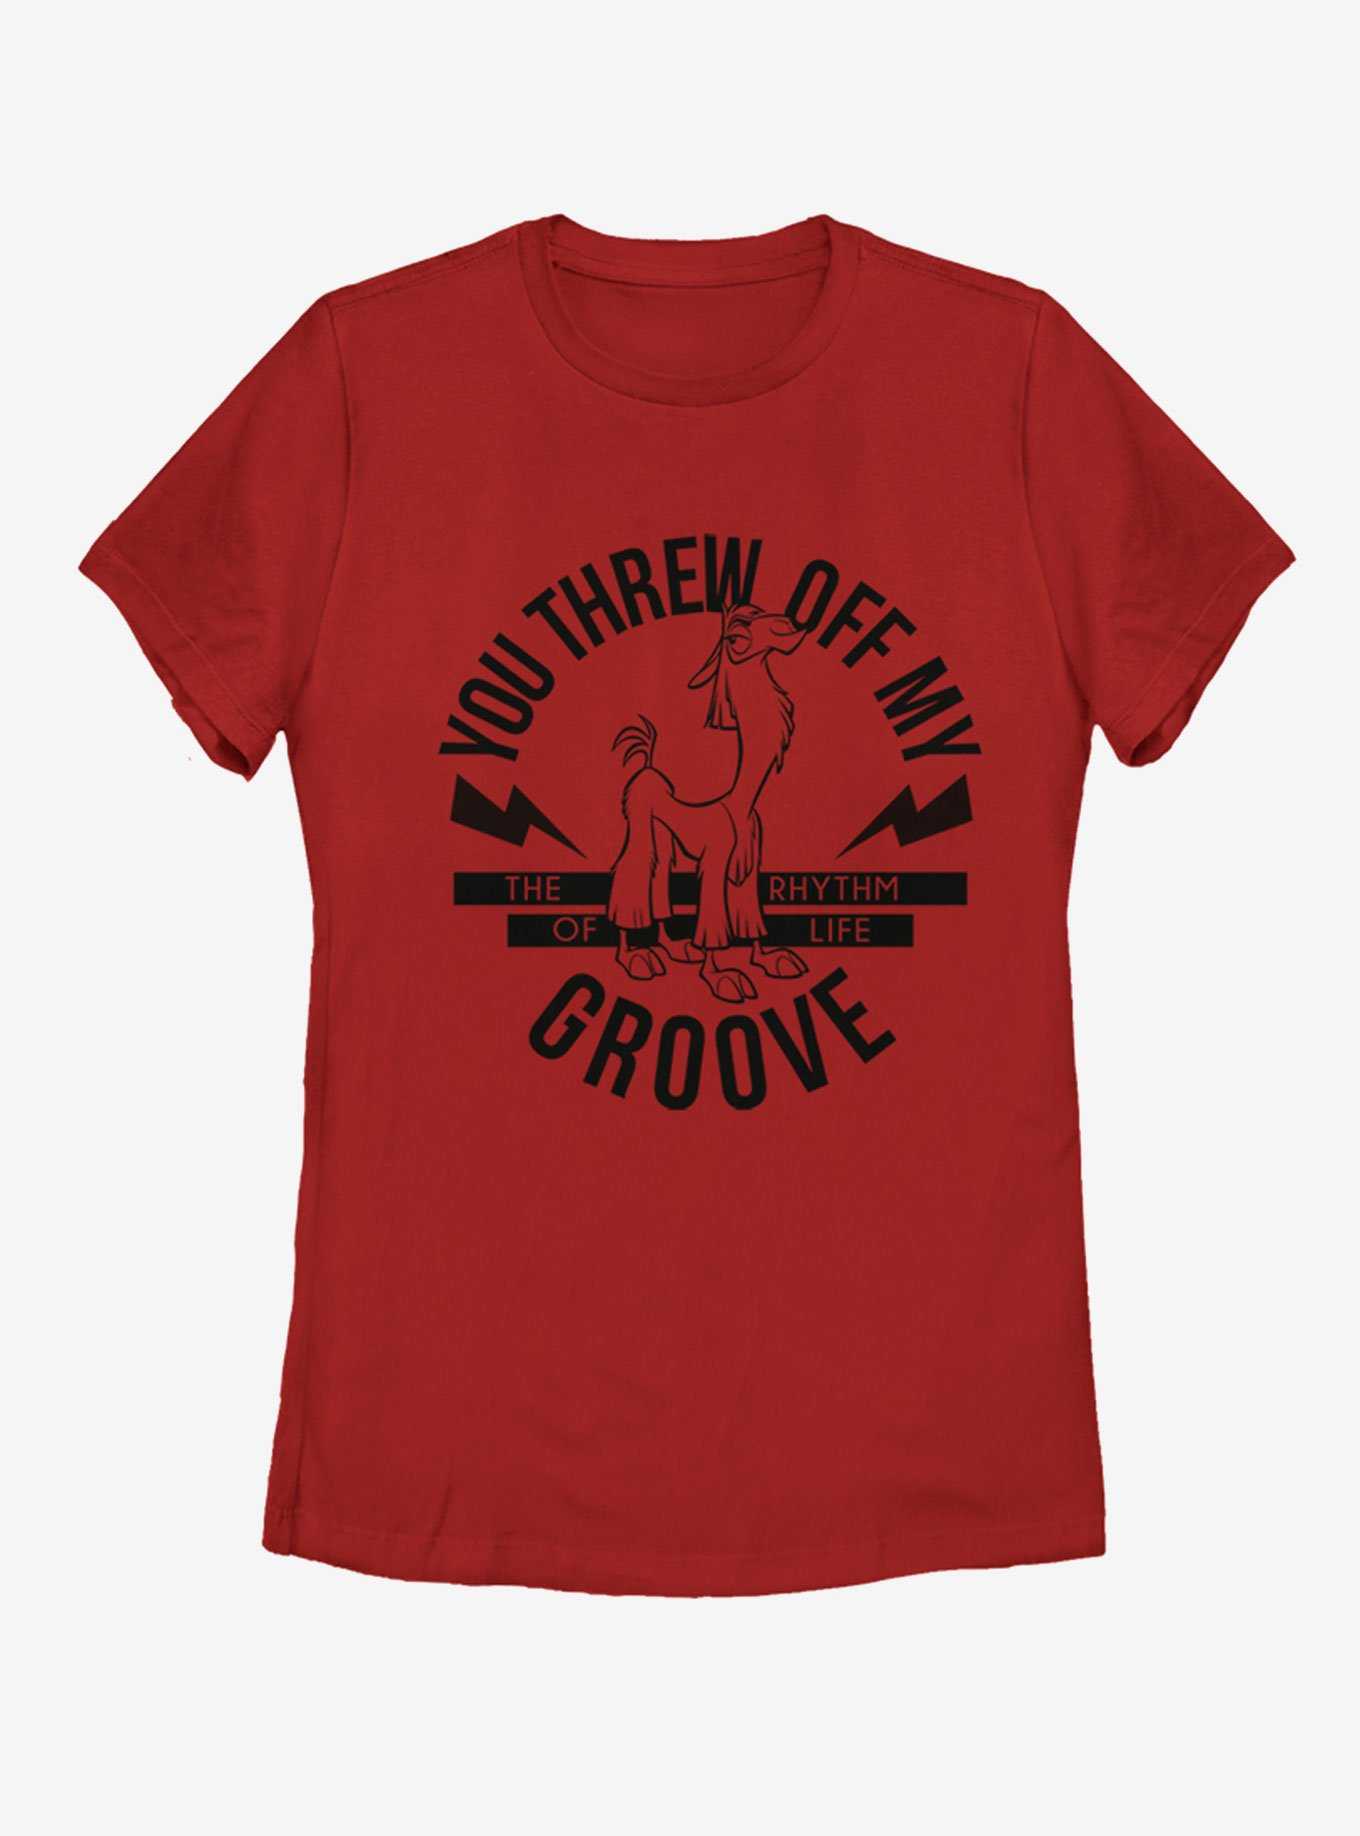 Disney The Emperor's New Groove Groove Stamp Womens T-Shirt, , hi-res